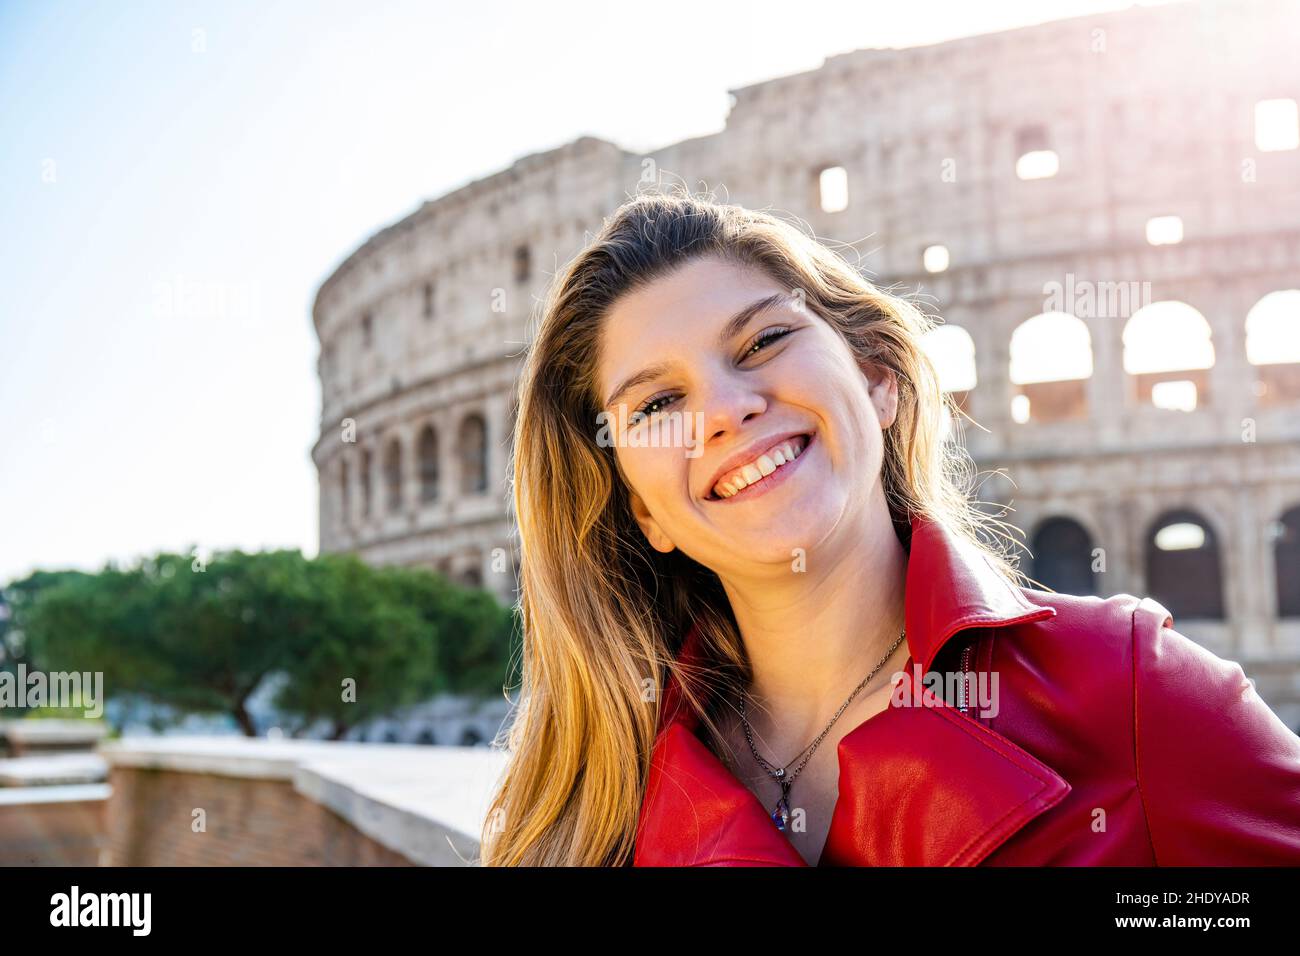 Young woman traveling to Rome. Backlight portrait of a young blonde woman smiling. On the background the Colosseum and on the right the Copy space for Stock Photo